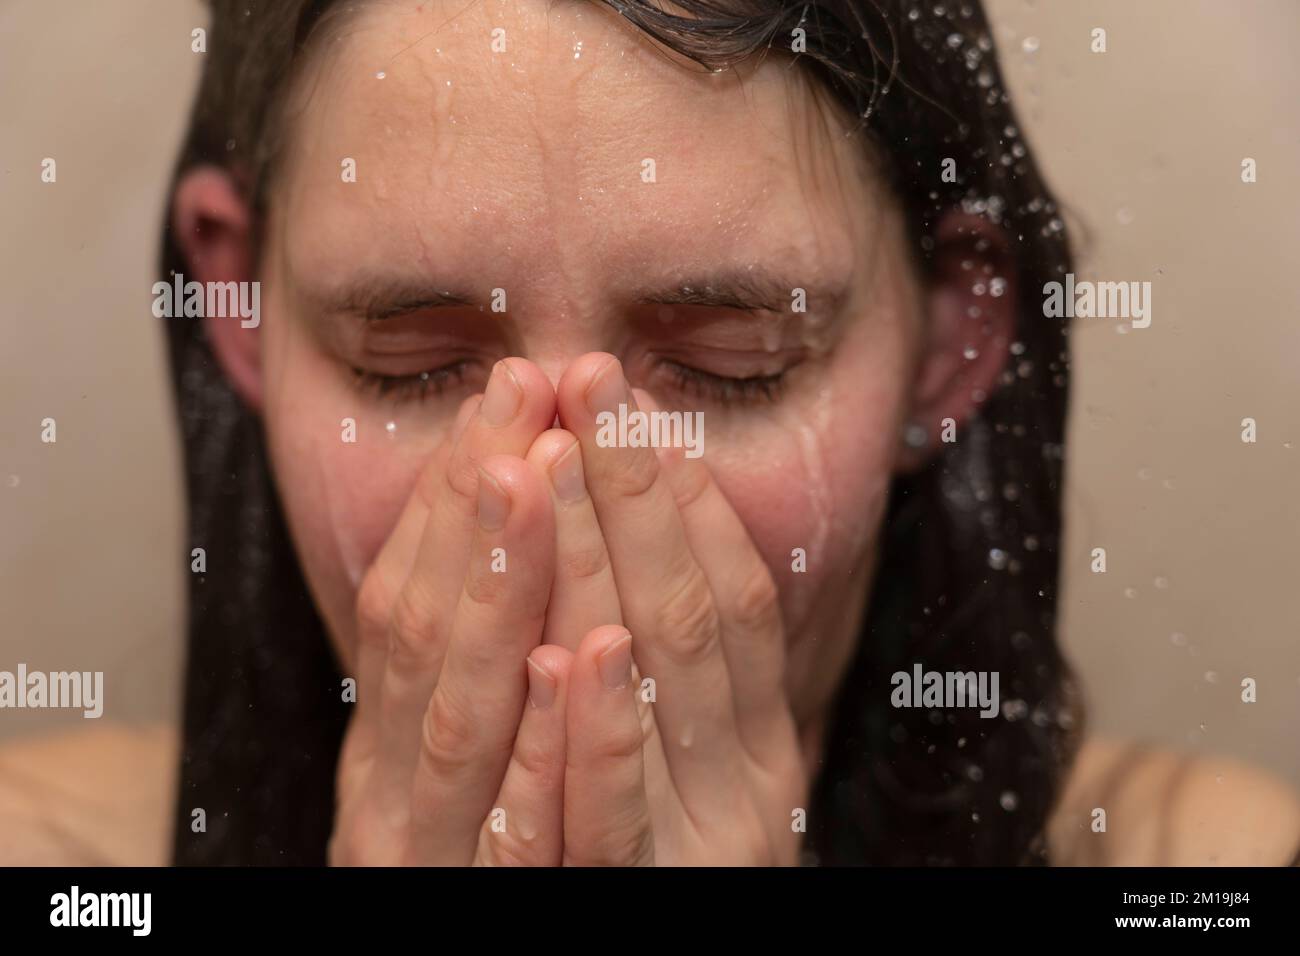 Young woman in shower with water running down her emotional face. Concept: bipolar disorder, mental health, feeling sad, feeling down, sadness Stock Photo